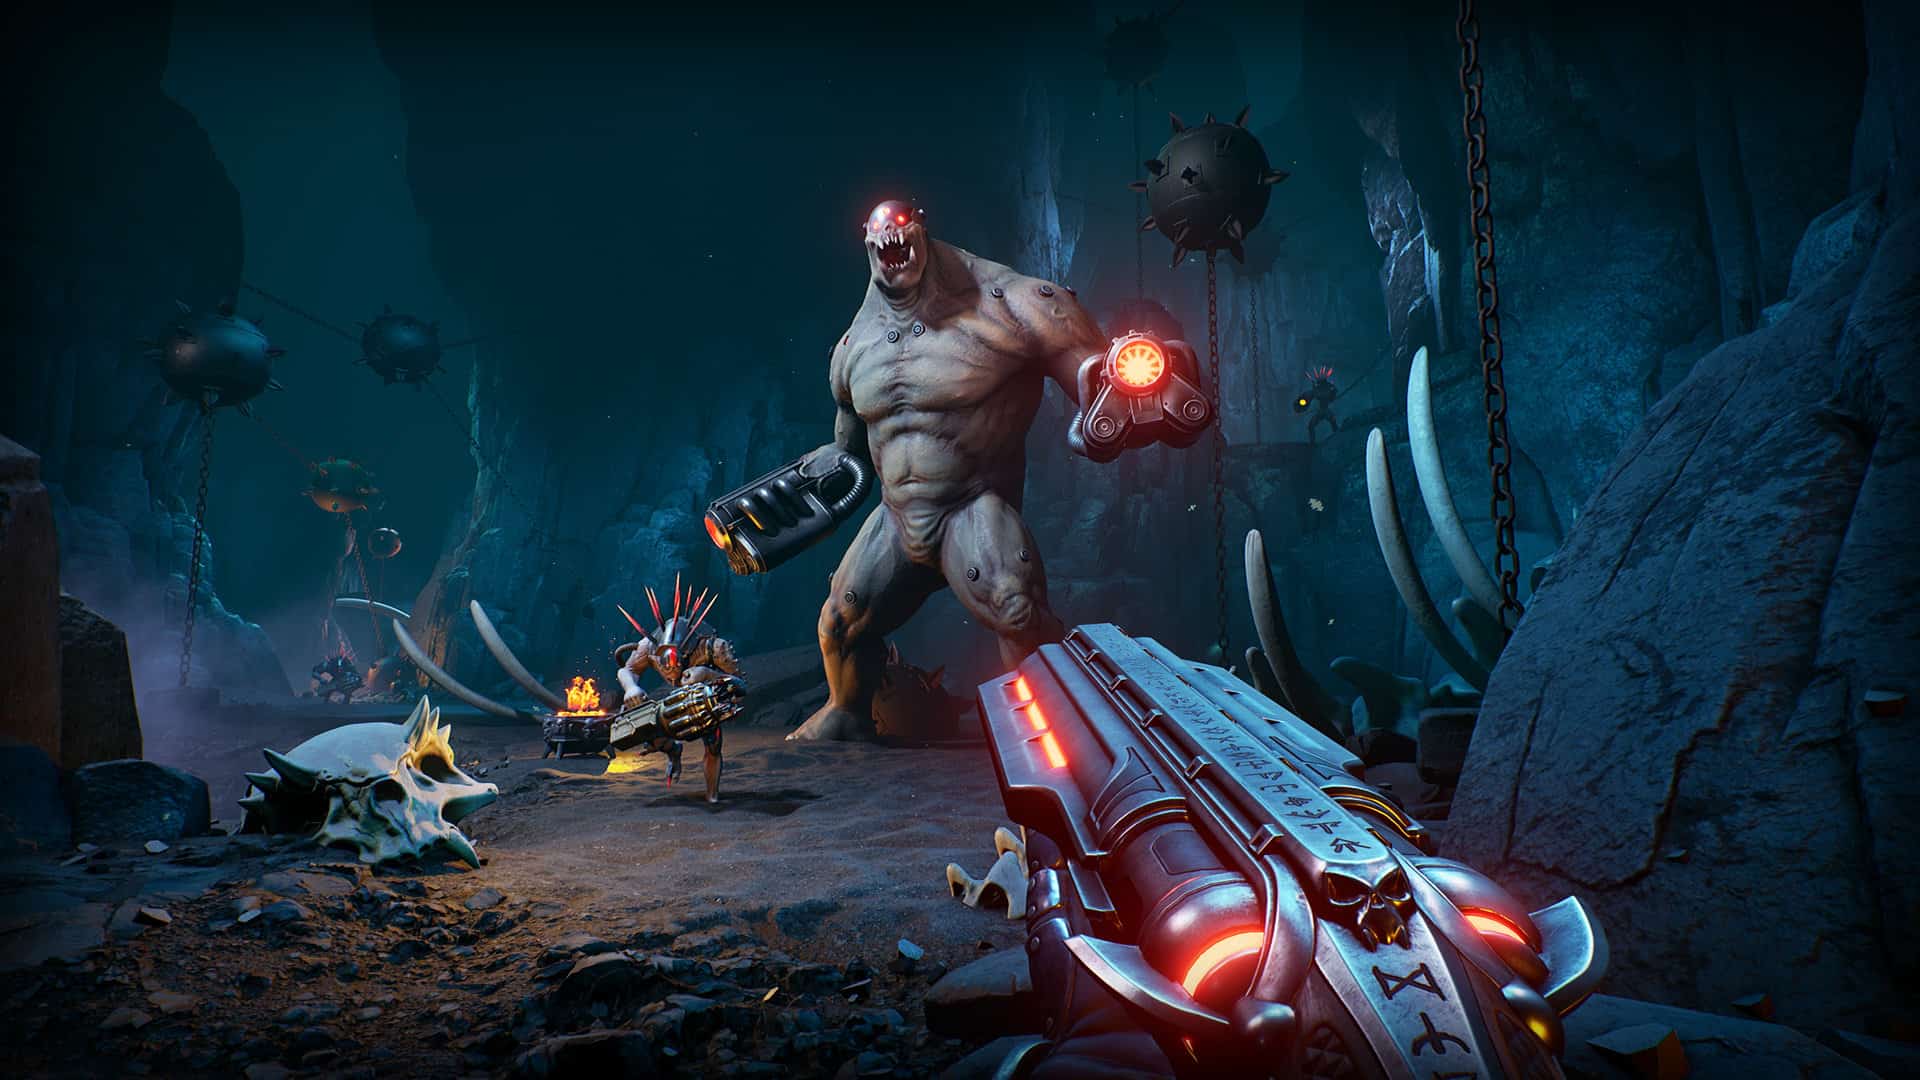 Scathe is a literal bullet-hell FPS coming to consoles and PC in 2022